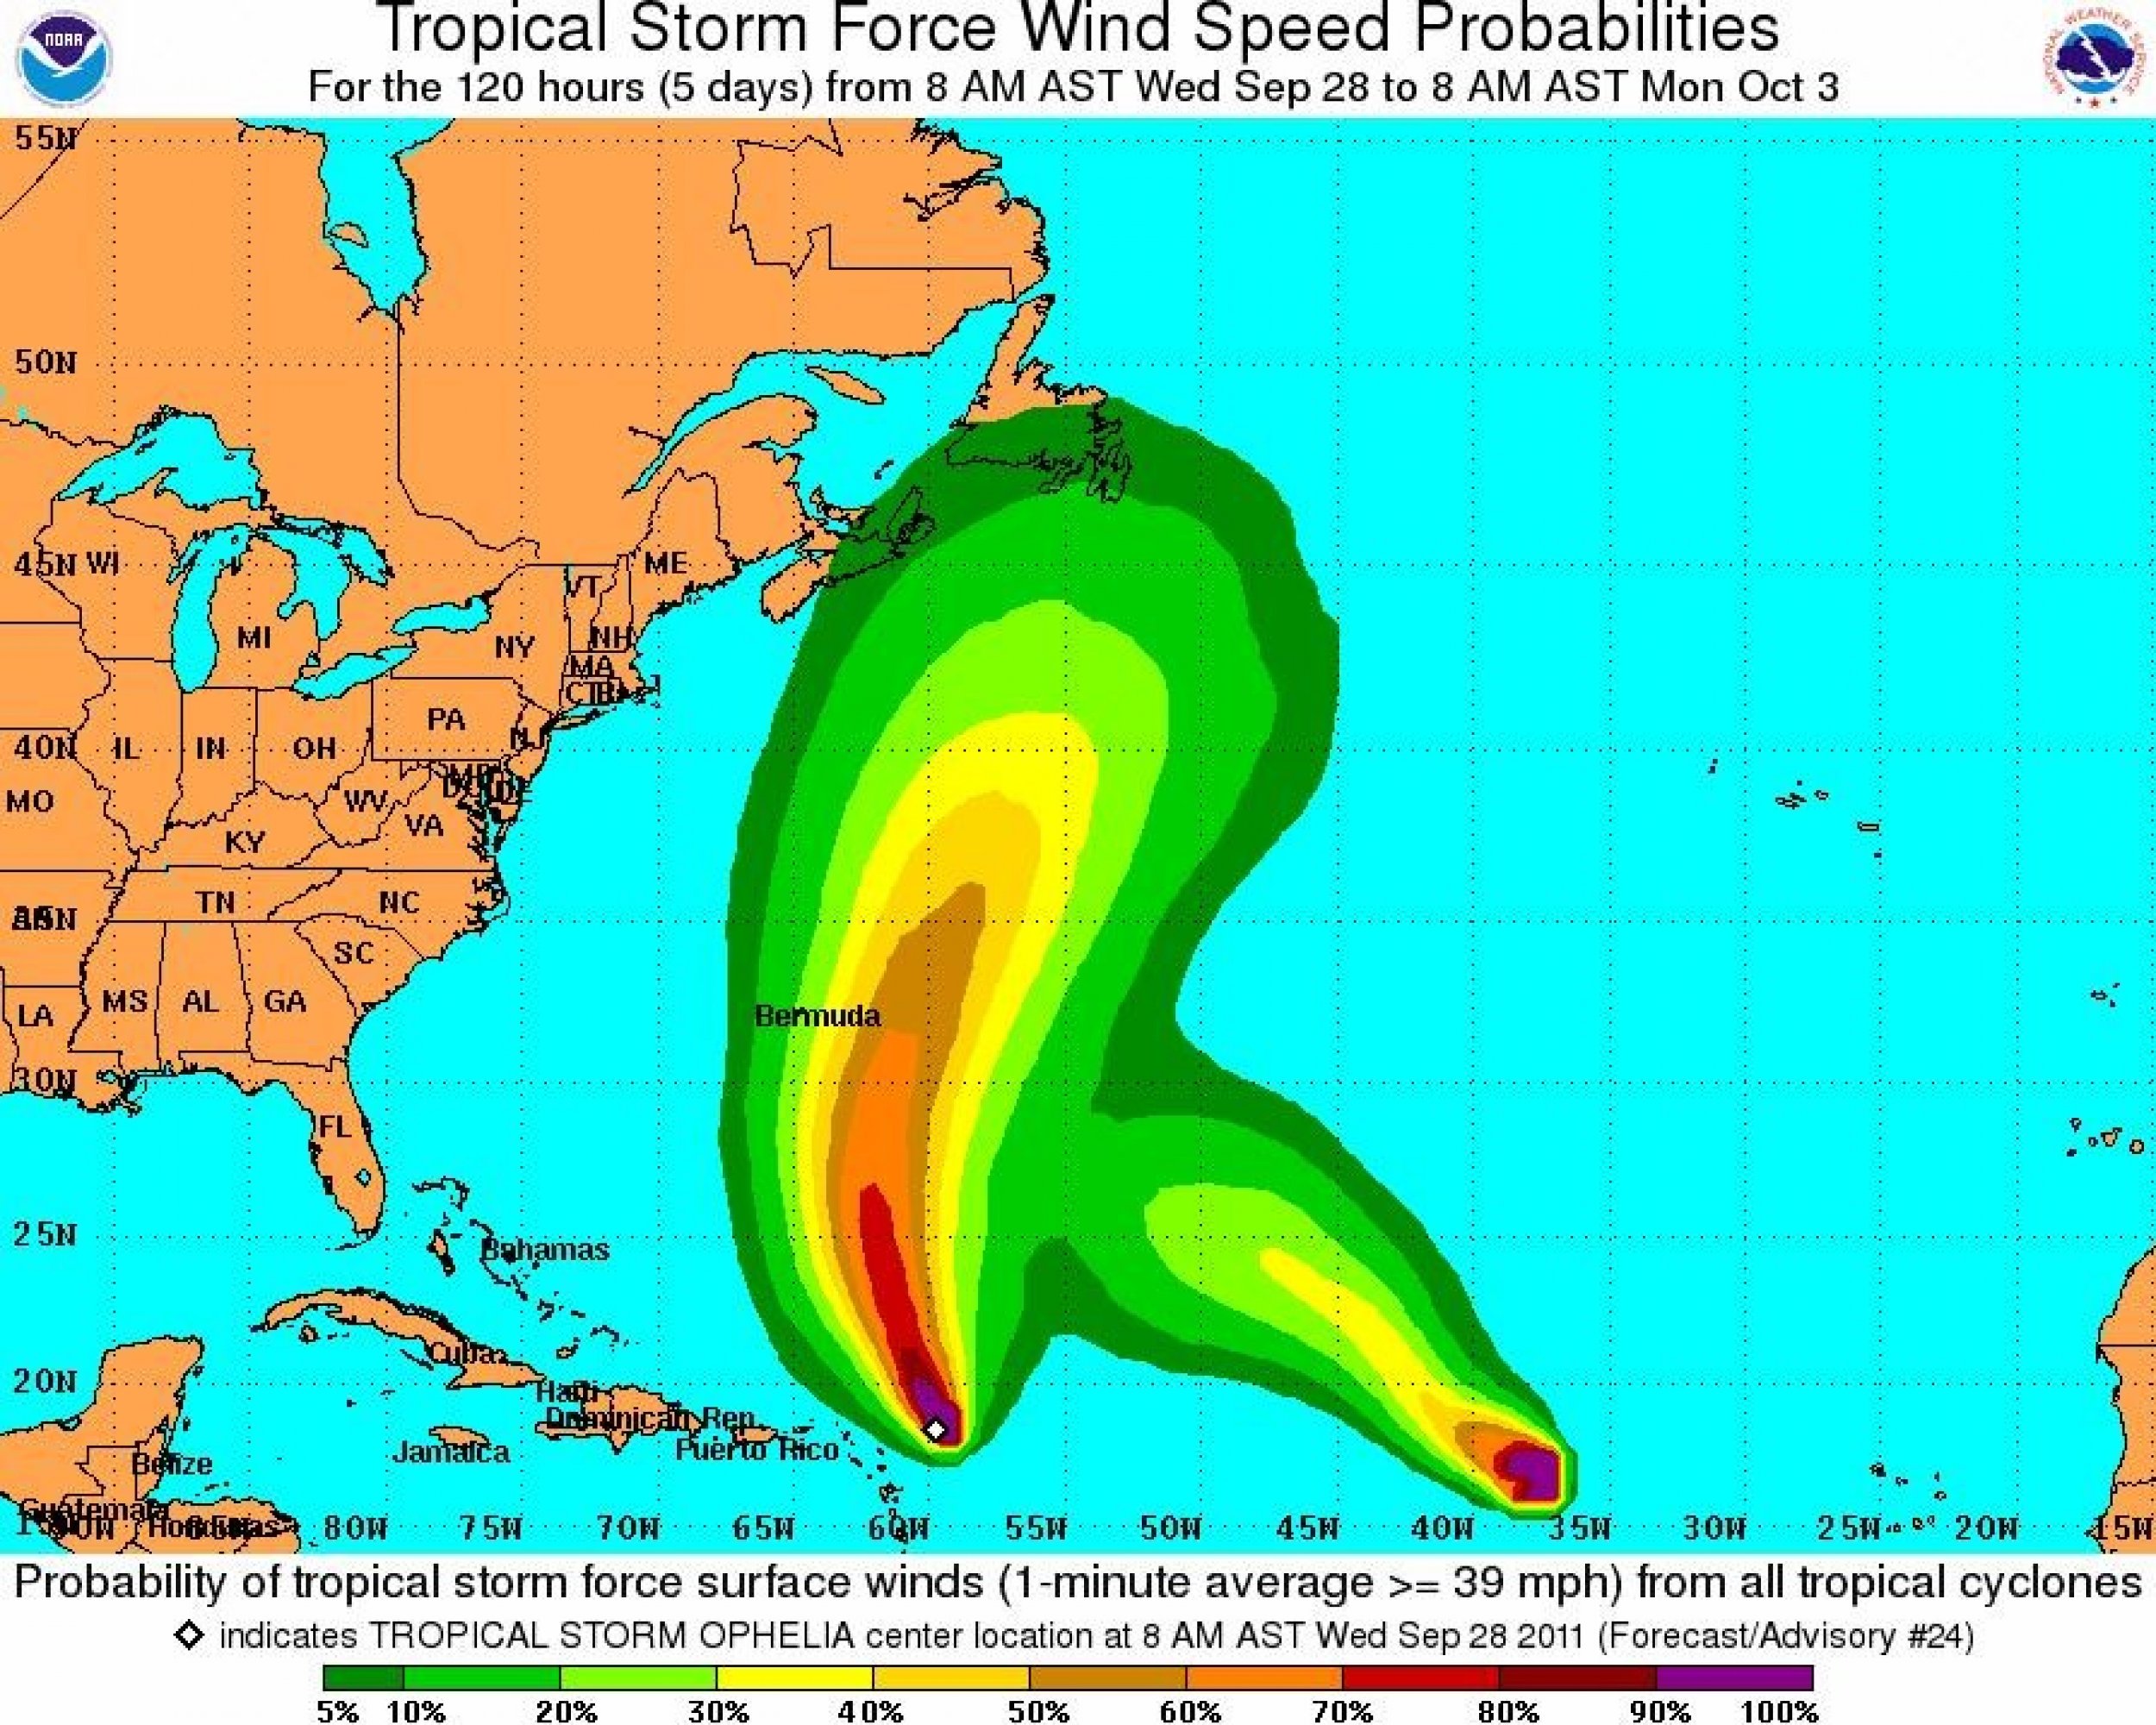 Tropical-storm-force wind speed probabilities